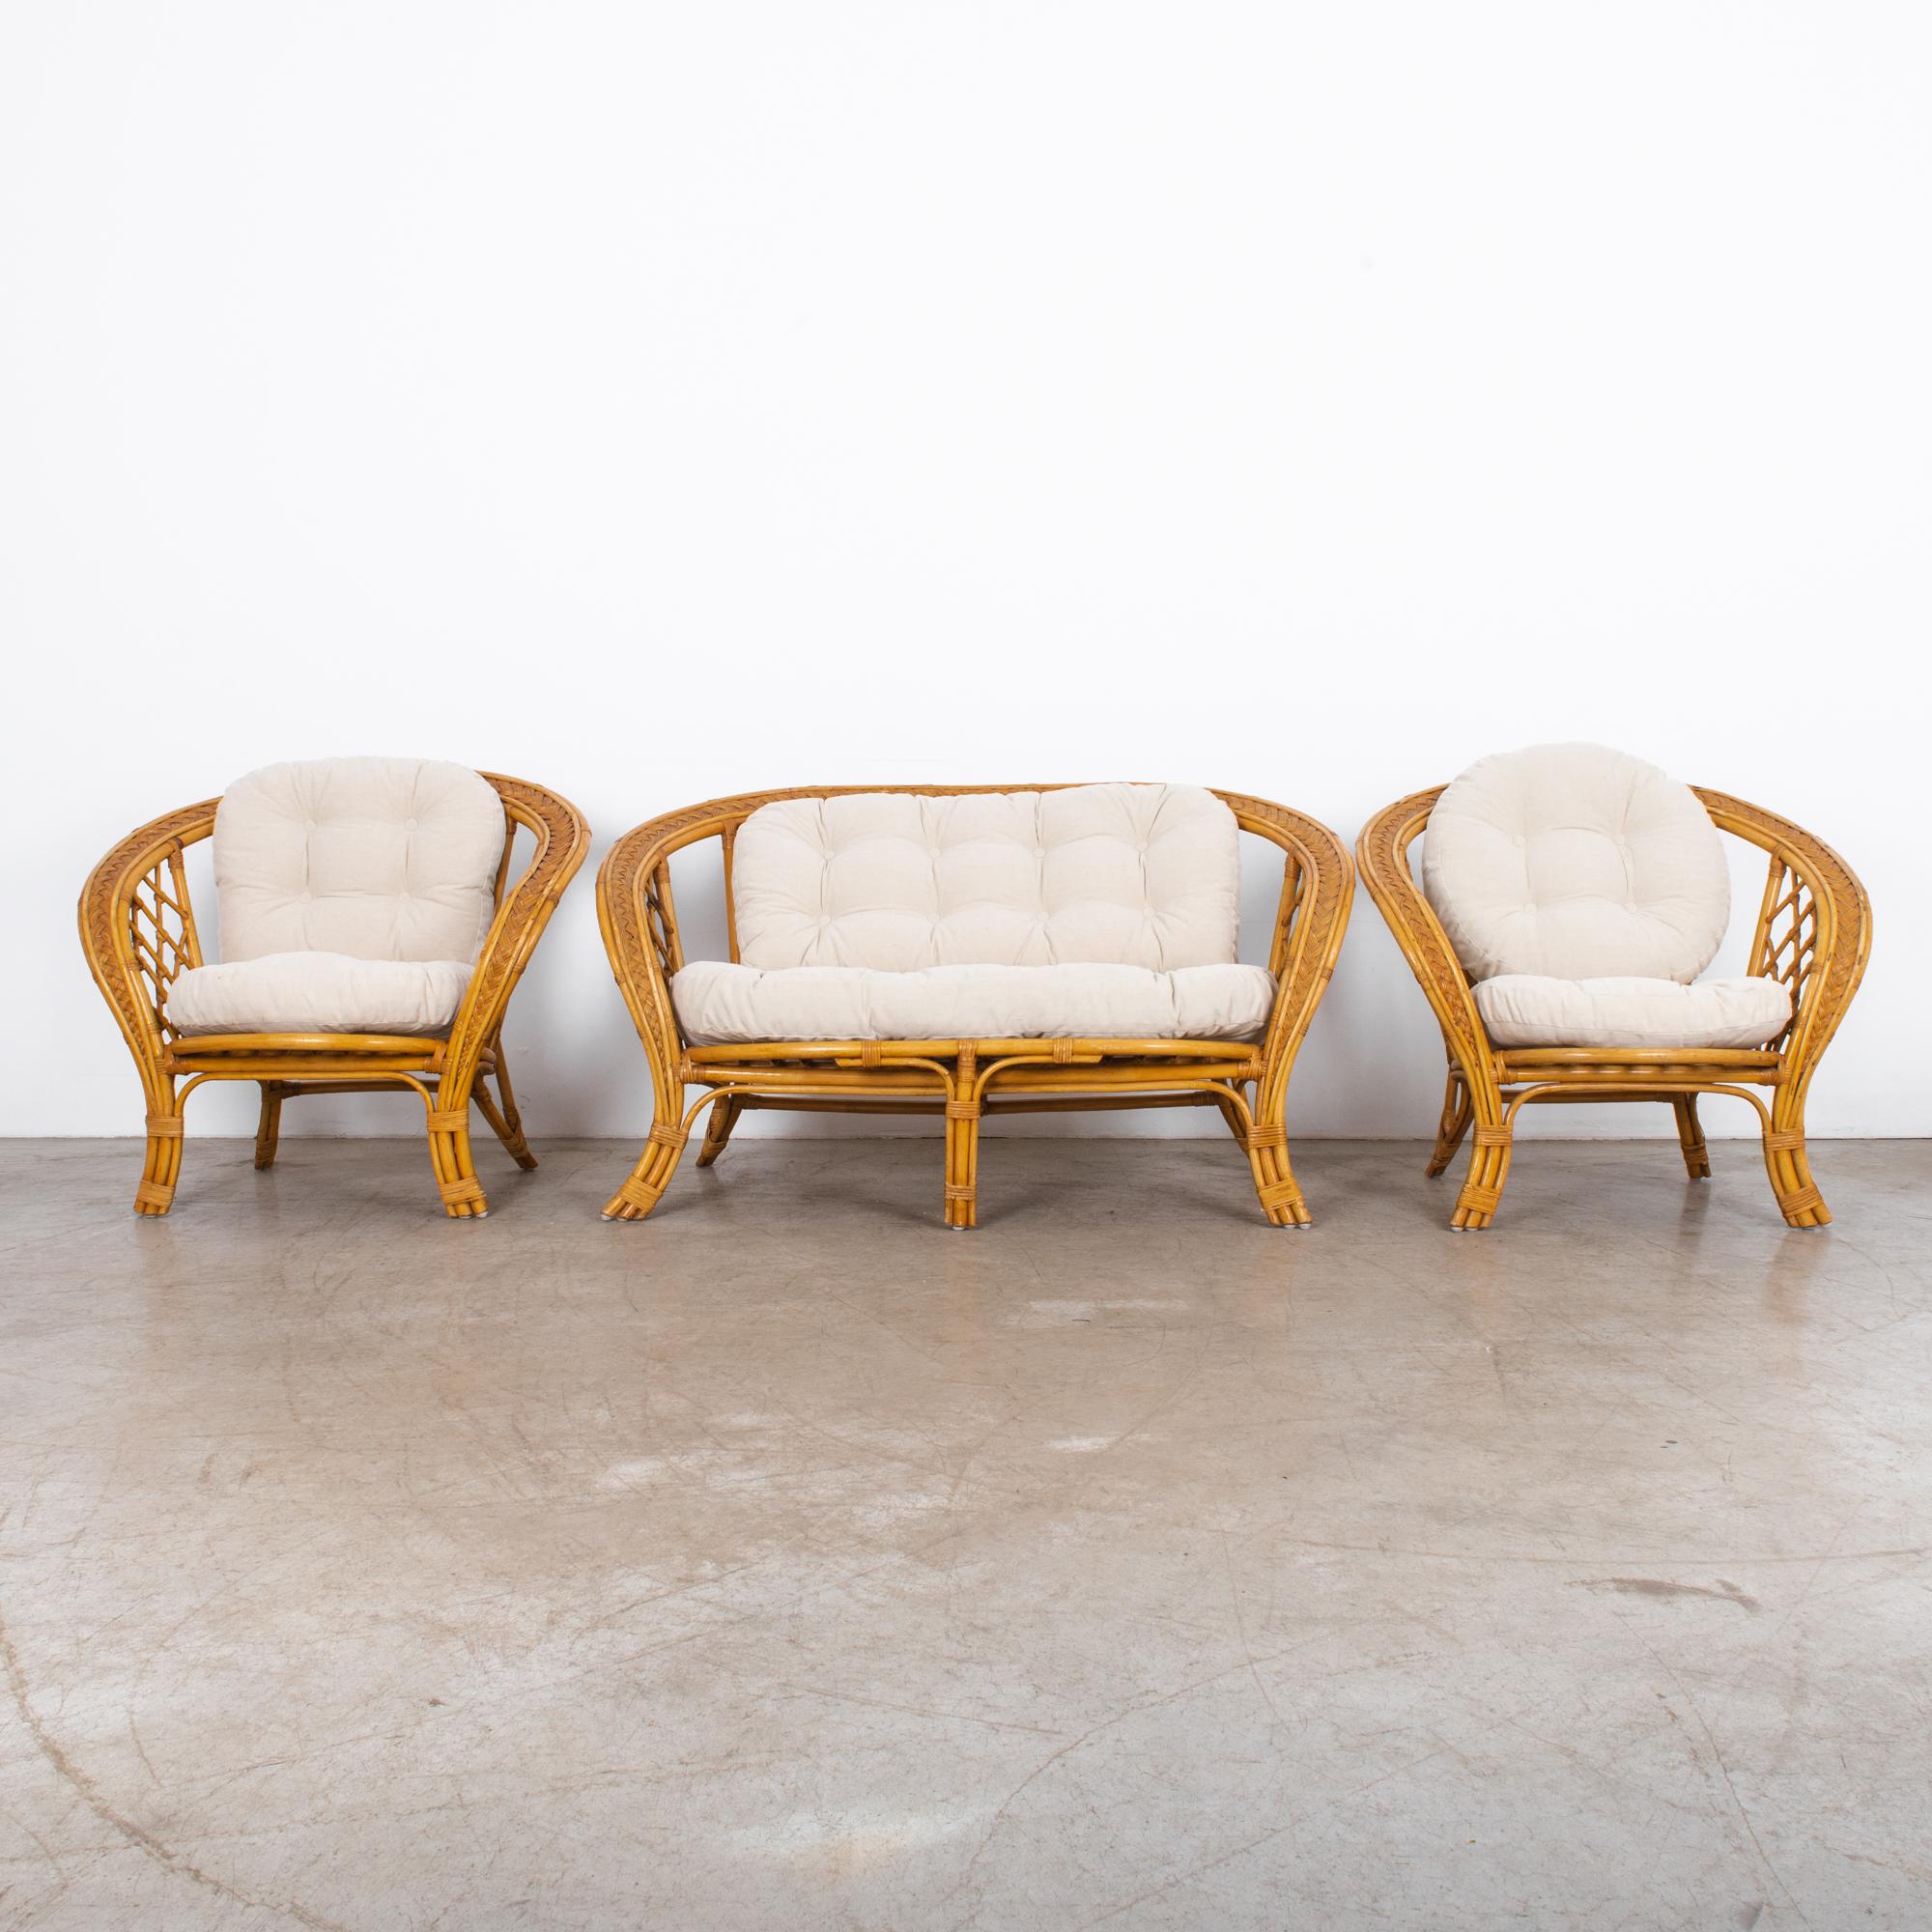 Stunning set of circa 1970s French rattan chairs. With a great curvey form these chairs capture the moment of French midcentury verve. In great shape, topped with fresh updated cushions, a comfy cotton linen blend.